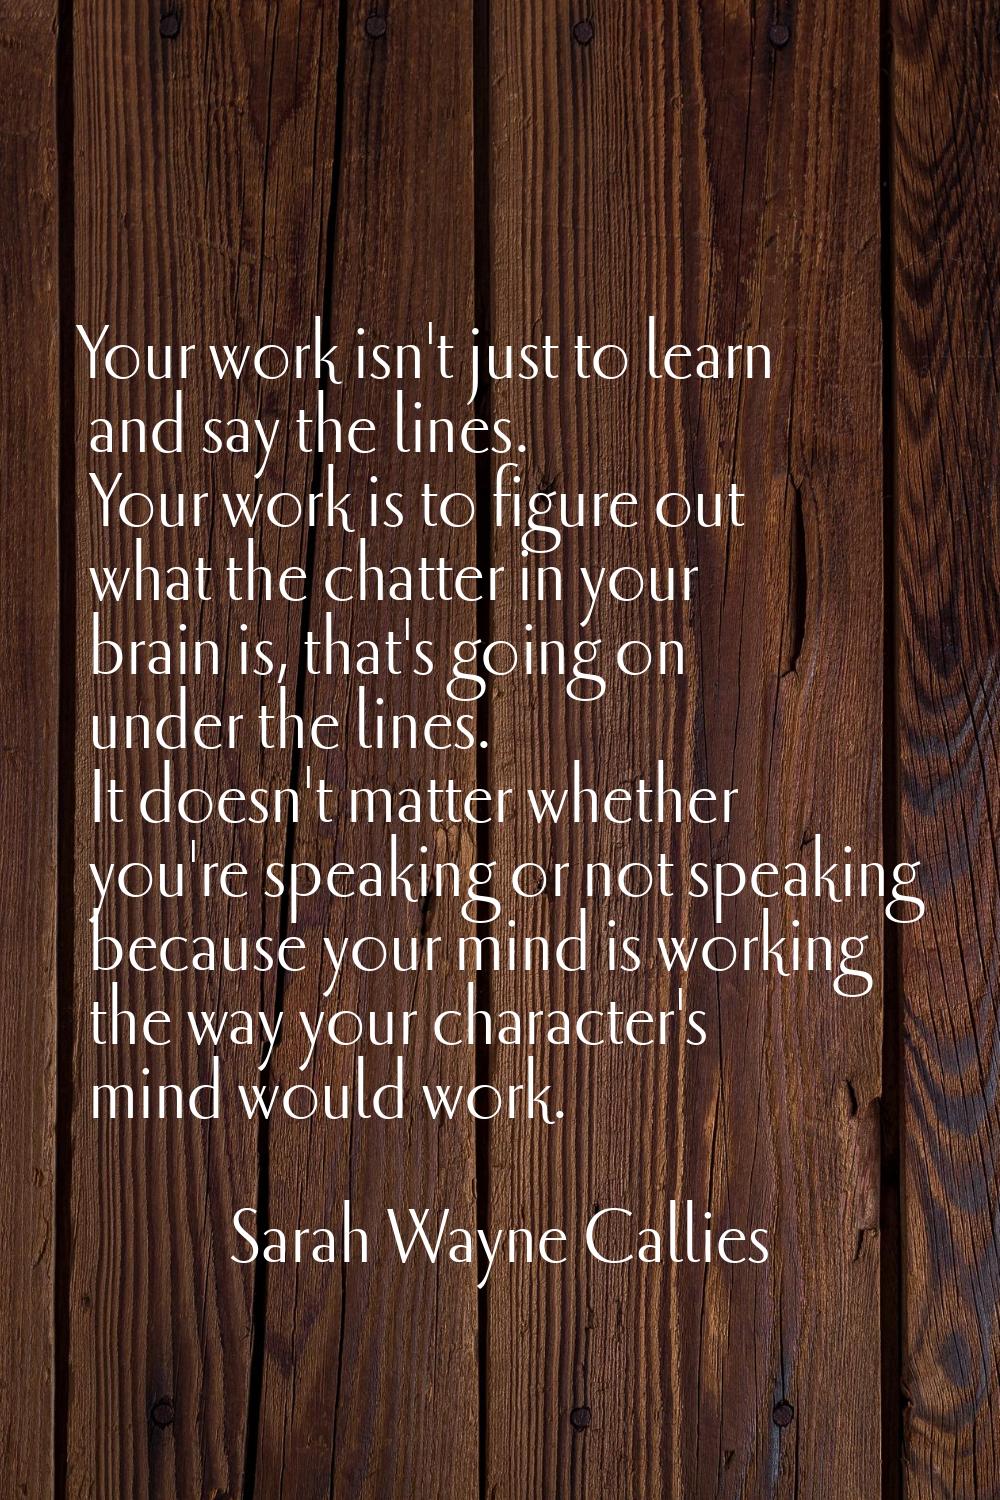 Your work isn't just to learn and say the lines. Your work is to figure out what the chatter in you